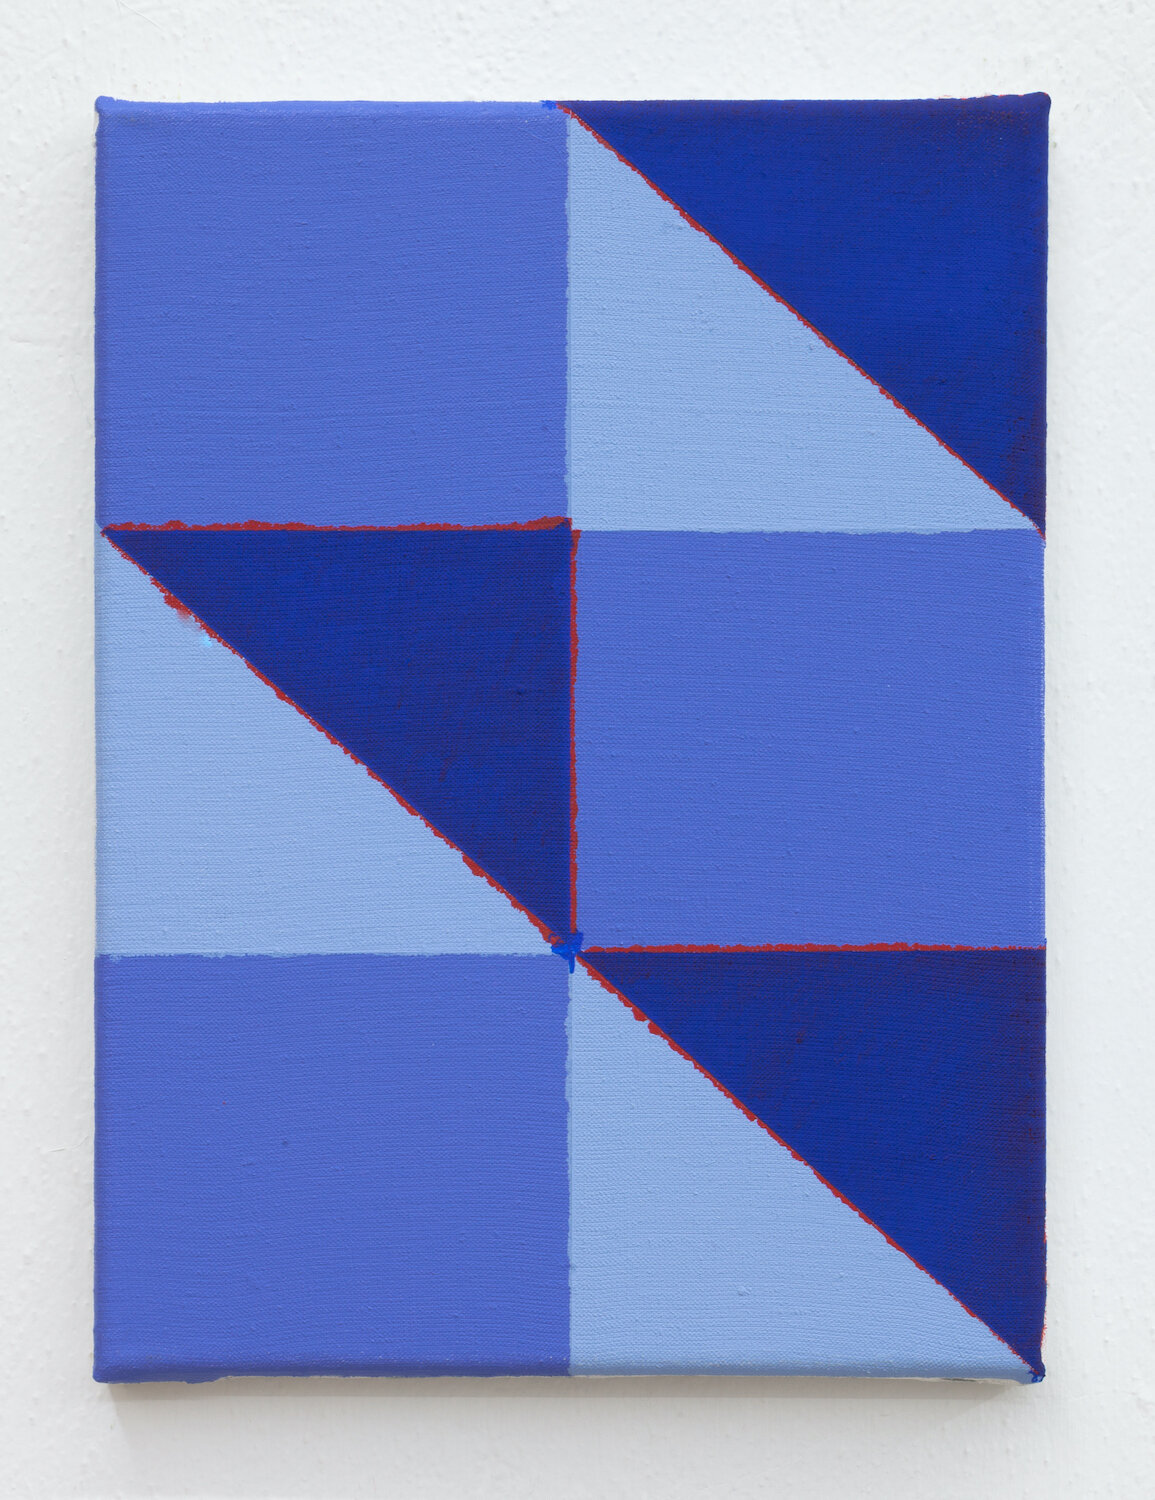  Joshua Abelow,  Untitled (Abstraction “HFF”) , 2019, Oil on linen, 12 x 9 inches 